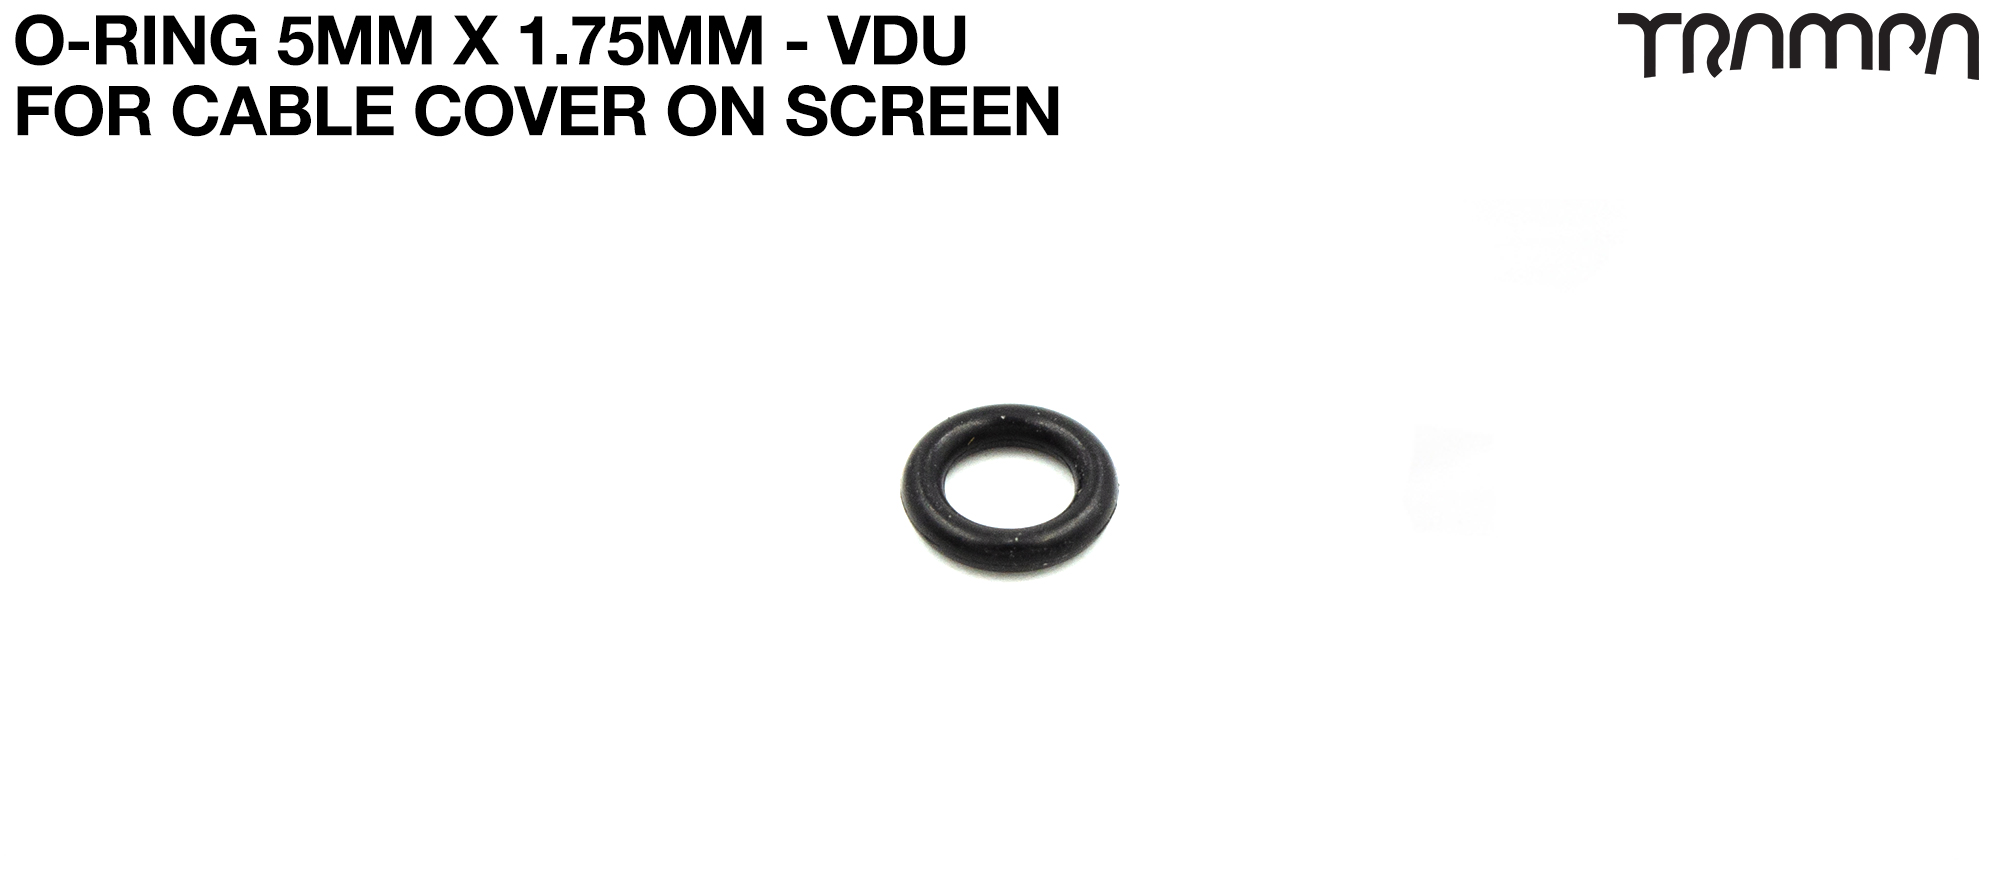 VESC DISPLAY UNIT - O-Ring 5mm x 1.75mm for Cable Cover on Screen - Rubber